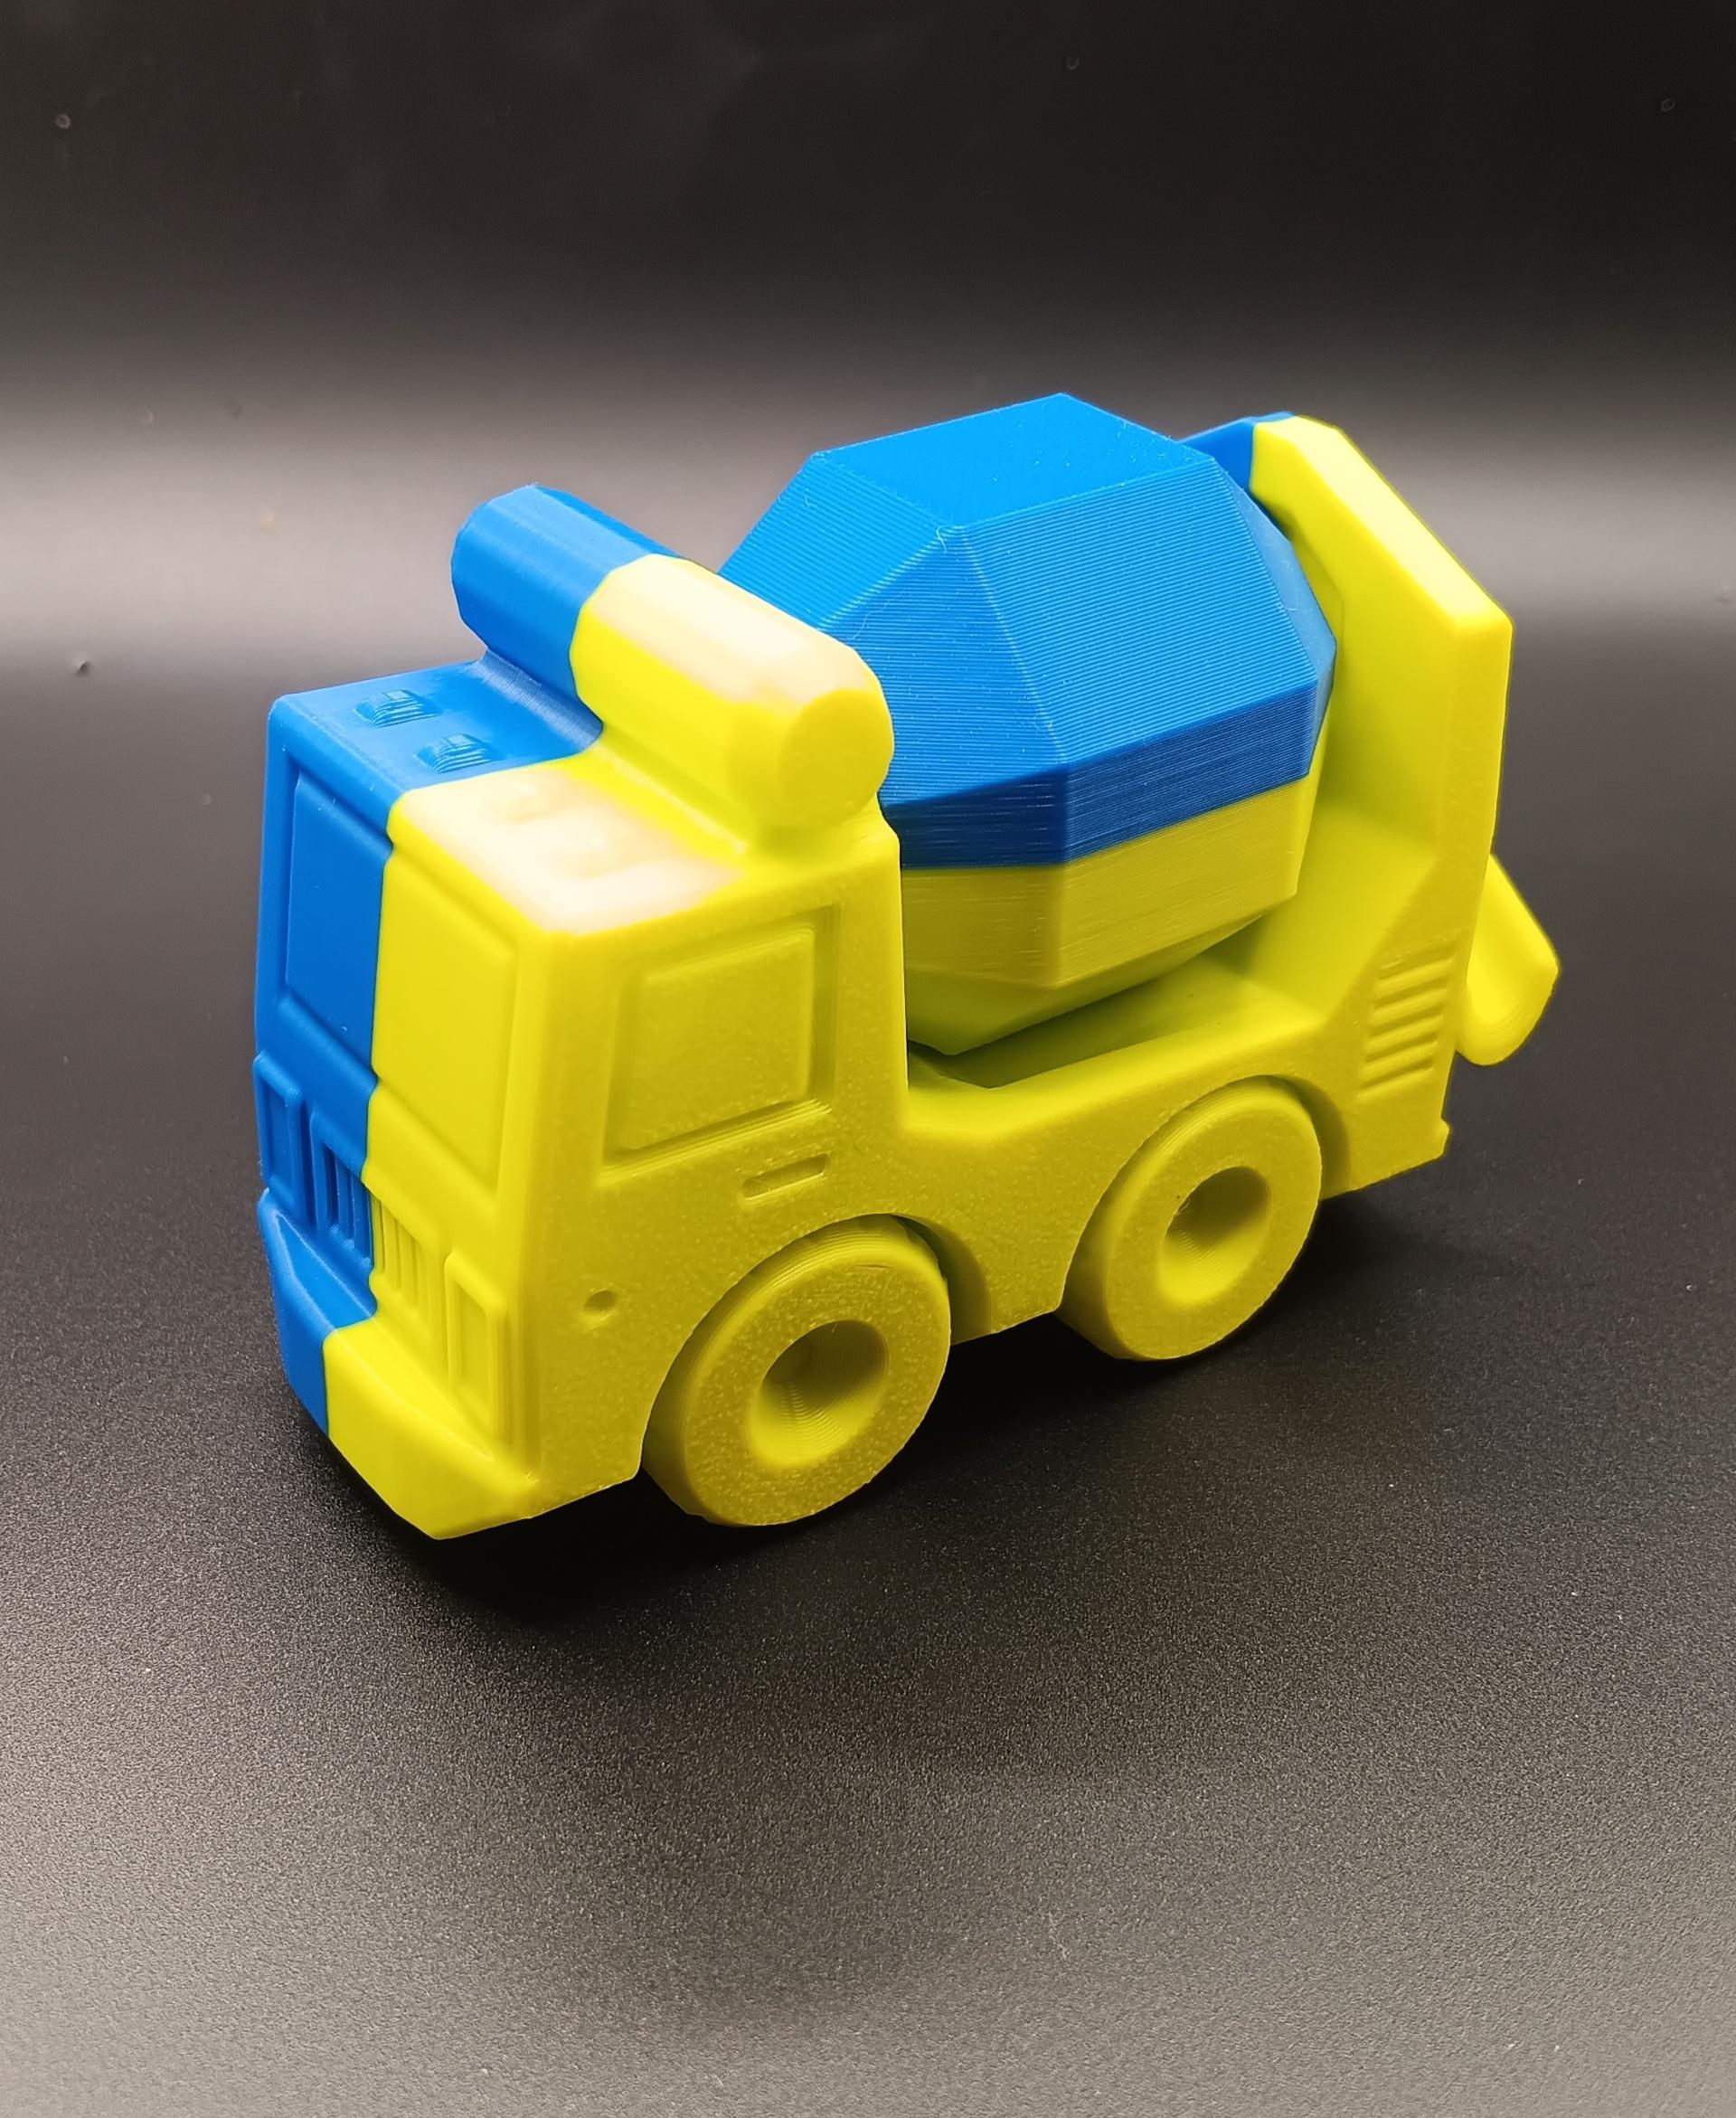 Fixum Dude Motors PiP Concrete Truck - Printed for Toys for Tots 2024. Printed in Sliceworx Robitobi Green and Royal Blue. - 3d model